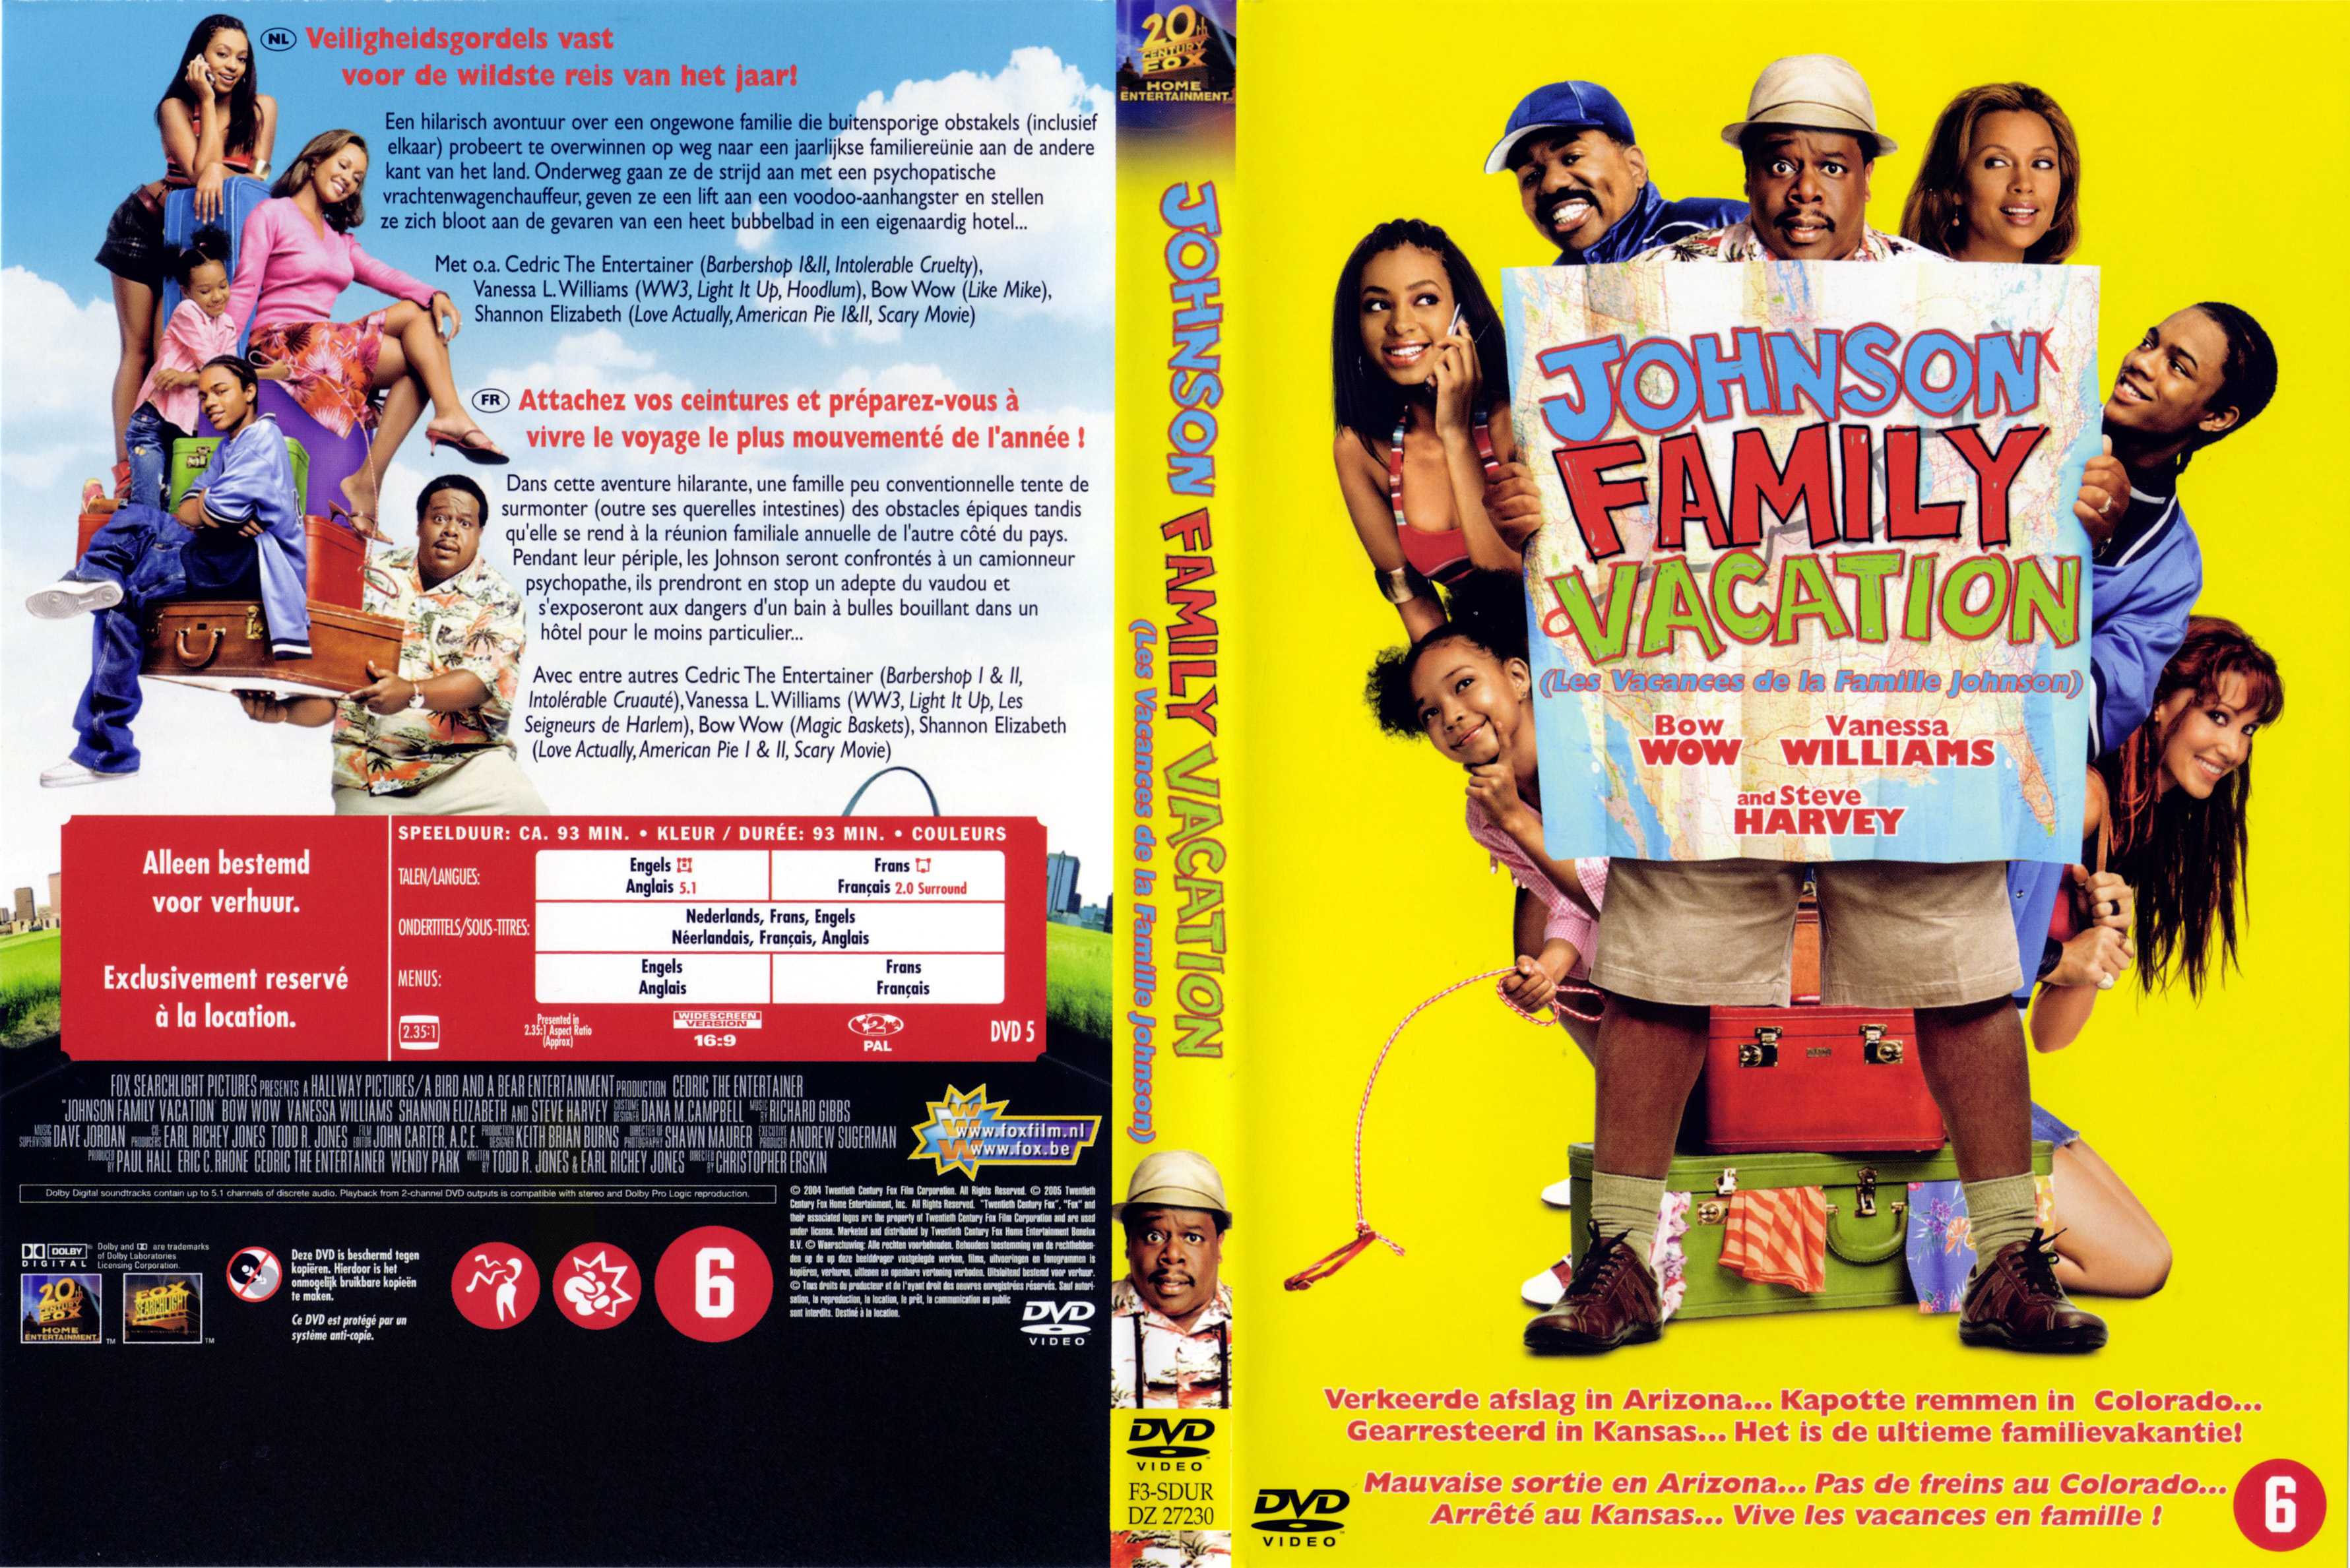 Jaquette DVD Johnson Family Vacation